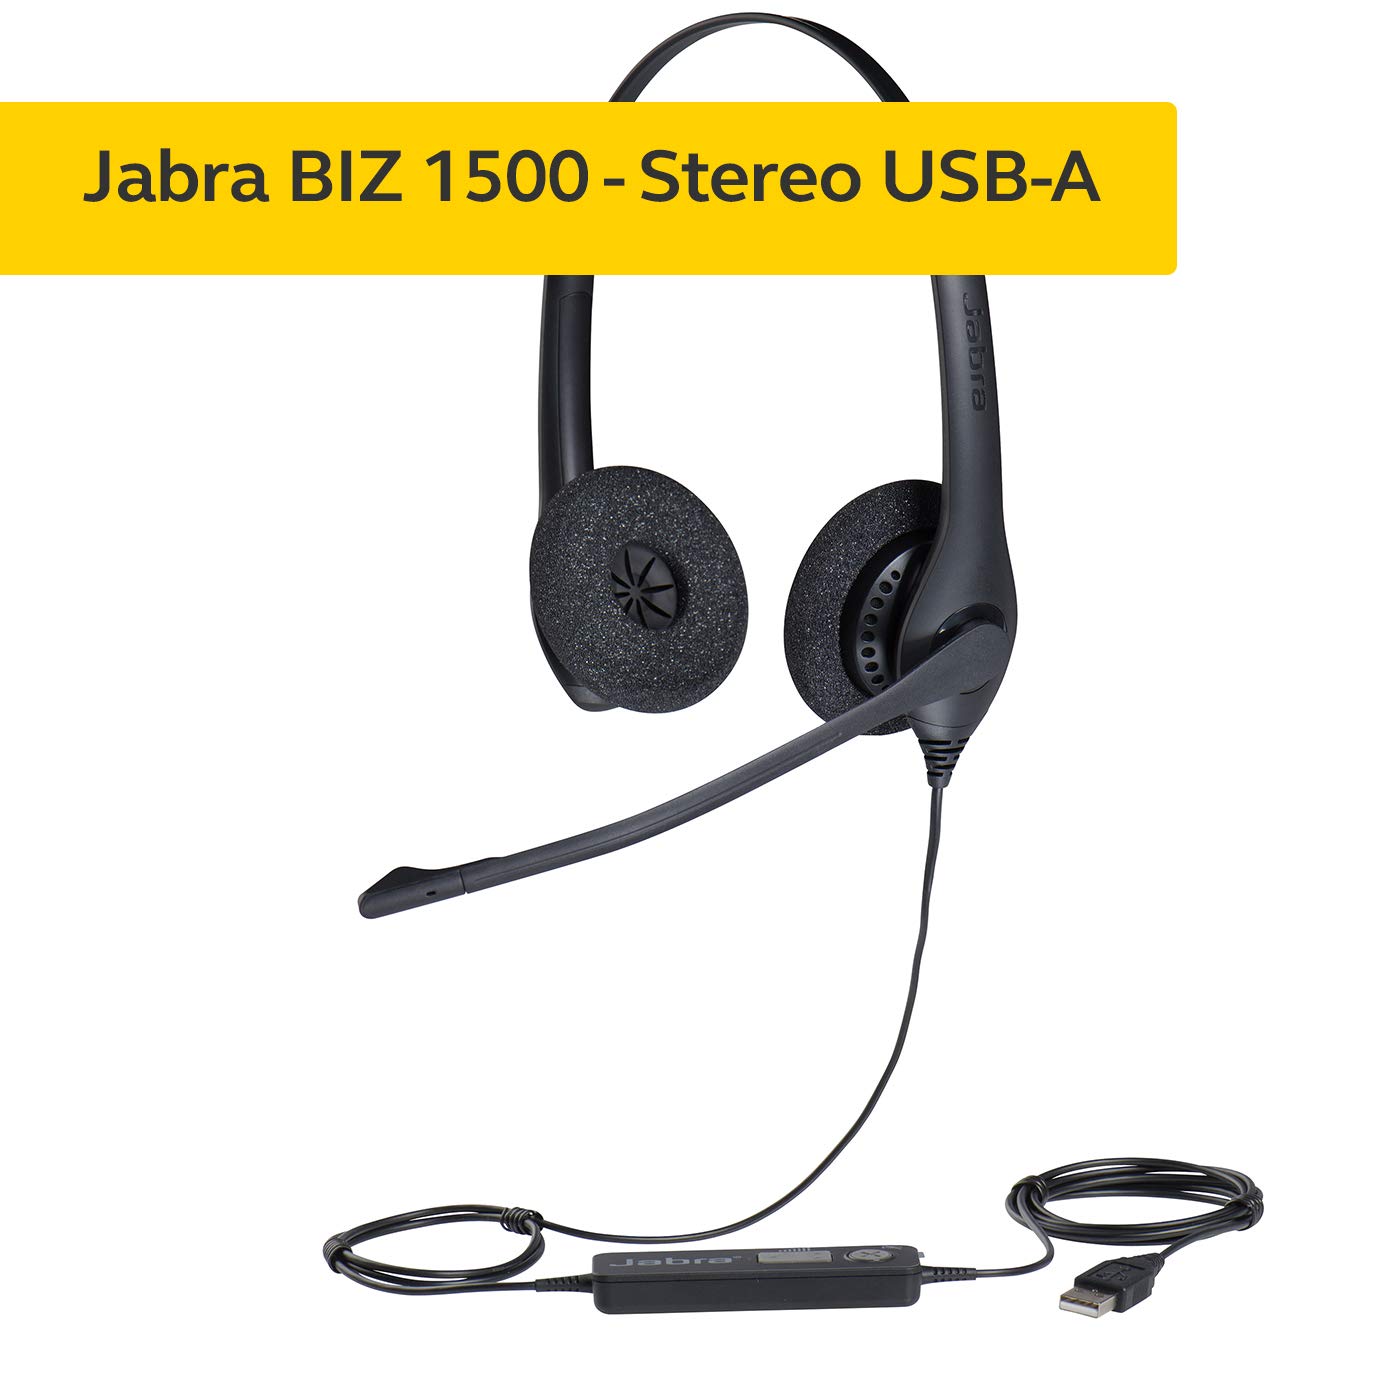 Jabra Biz 1500 USB-A On-Ear Stereo Headset - Corded Headphone with Noise-cancelling Microphone, Control Unit and Volume Spike Protection for Deskphones and Softphones, Wired